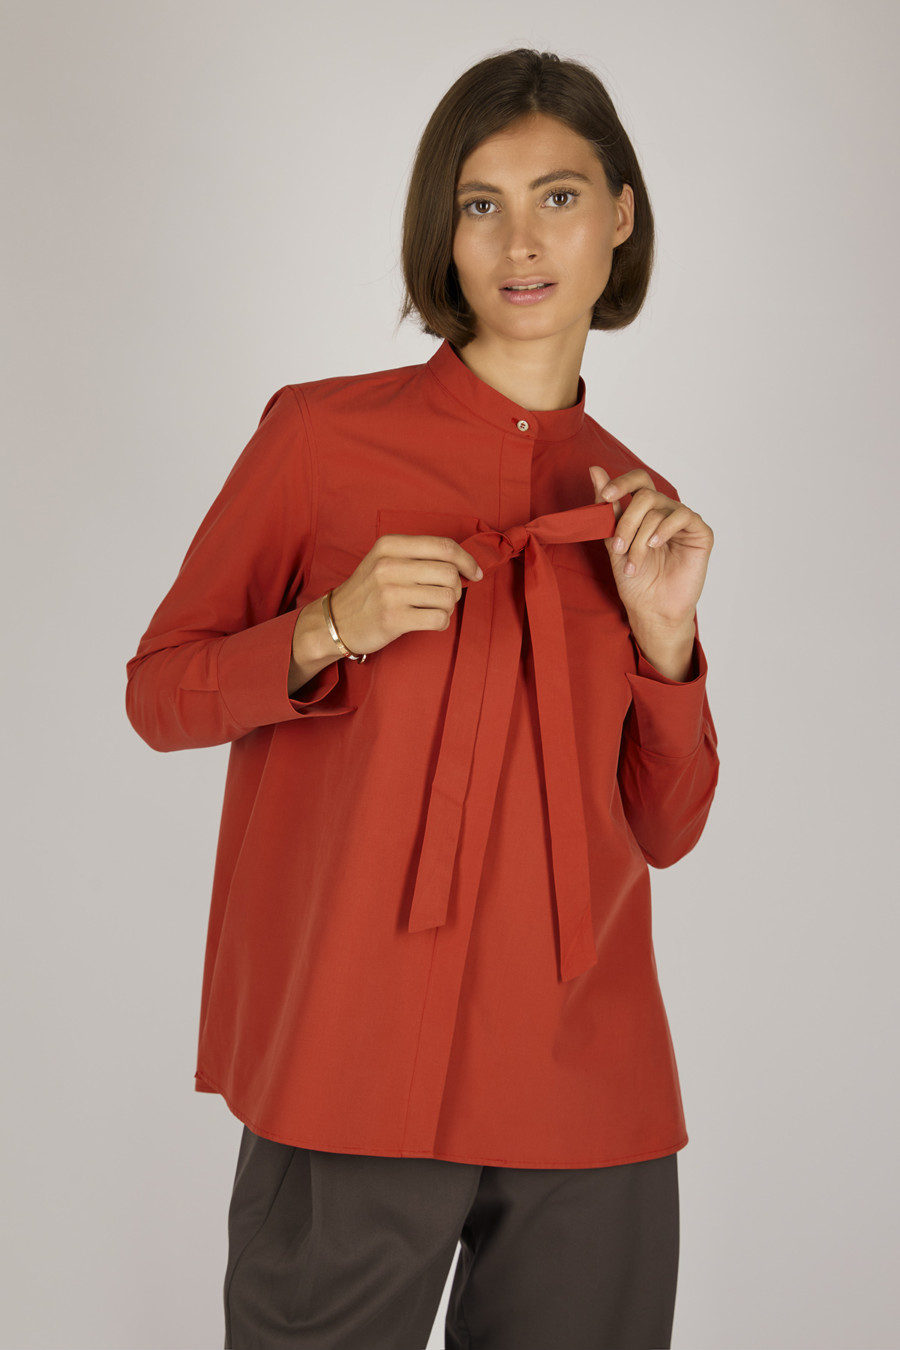 EVE – Blouse with stand-up collar and binding element – Color: Red Hot